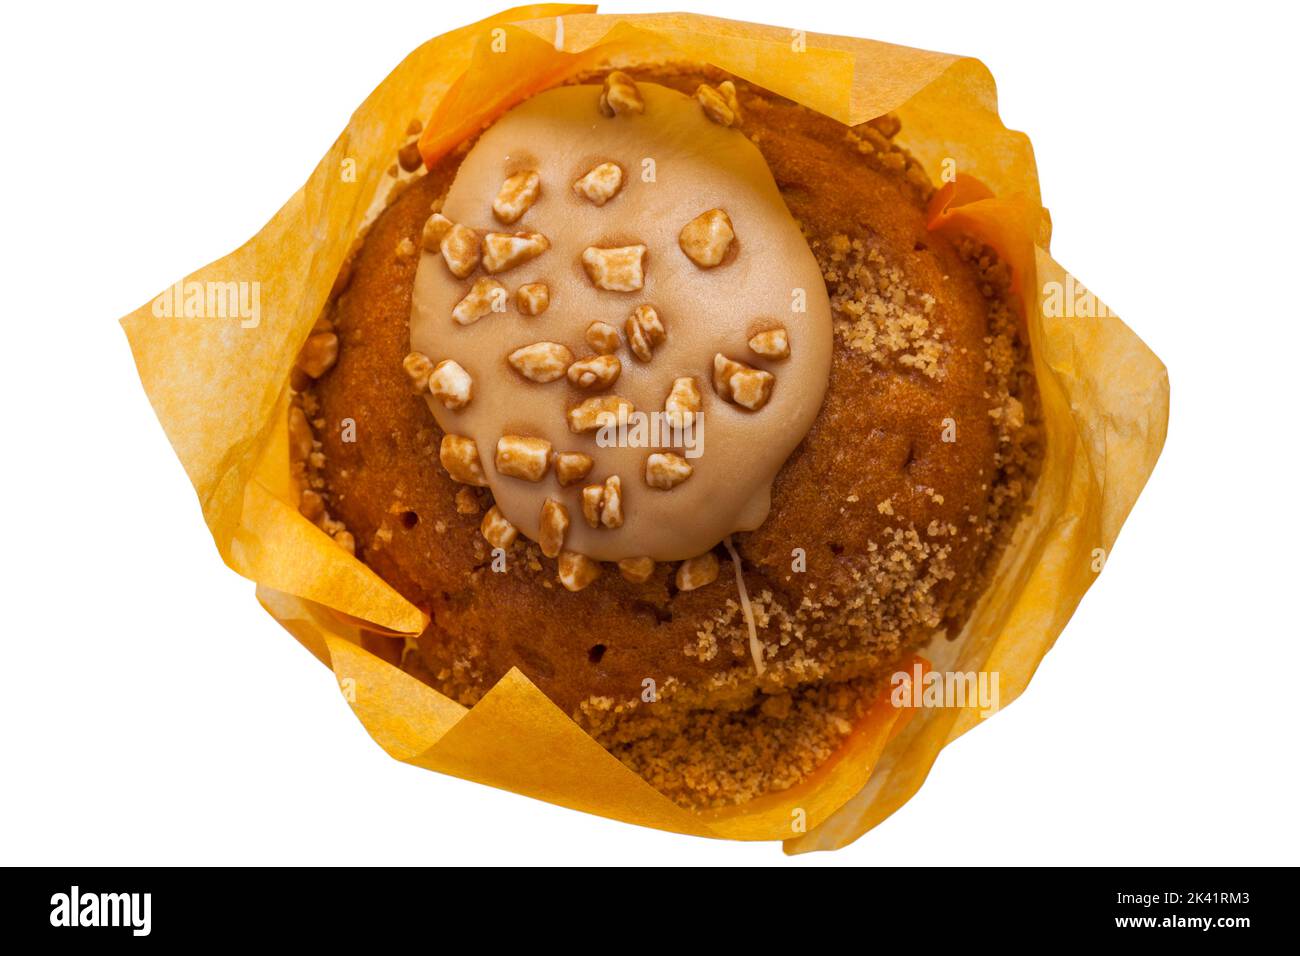 Caramelised Biscuit Muffin by Sainsbury's from Sainsbury's in-store bakery isolated on white background Stock Photo